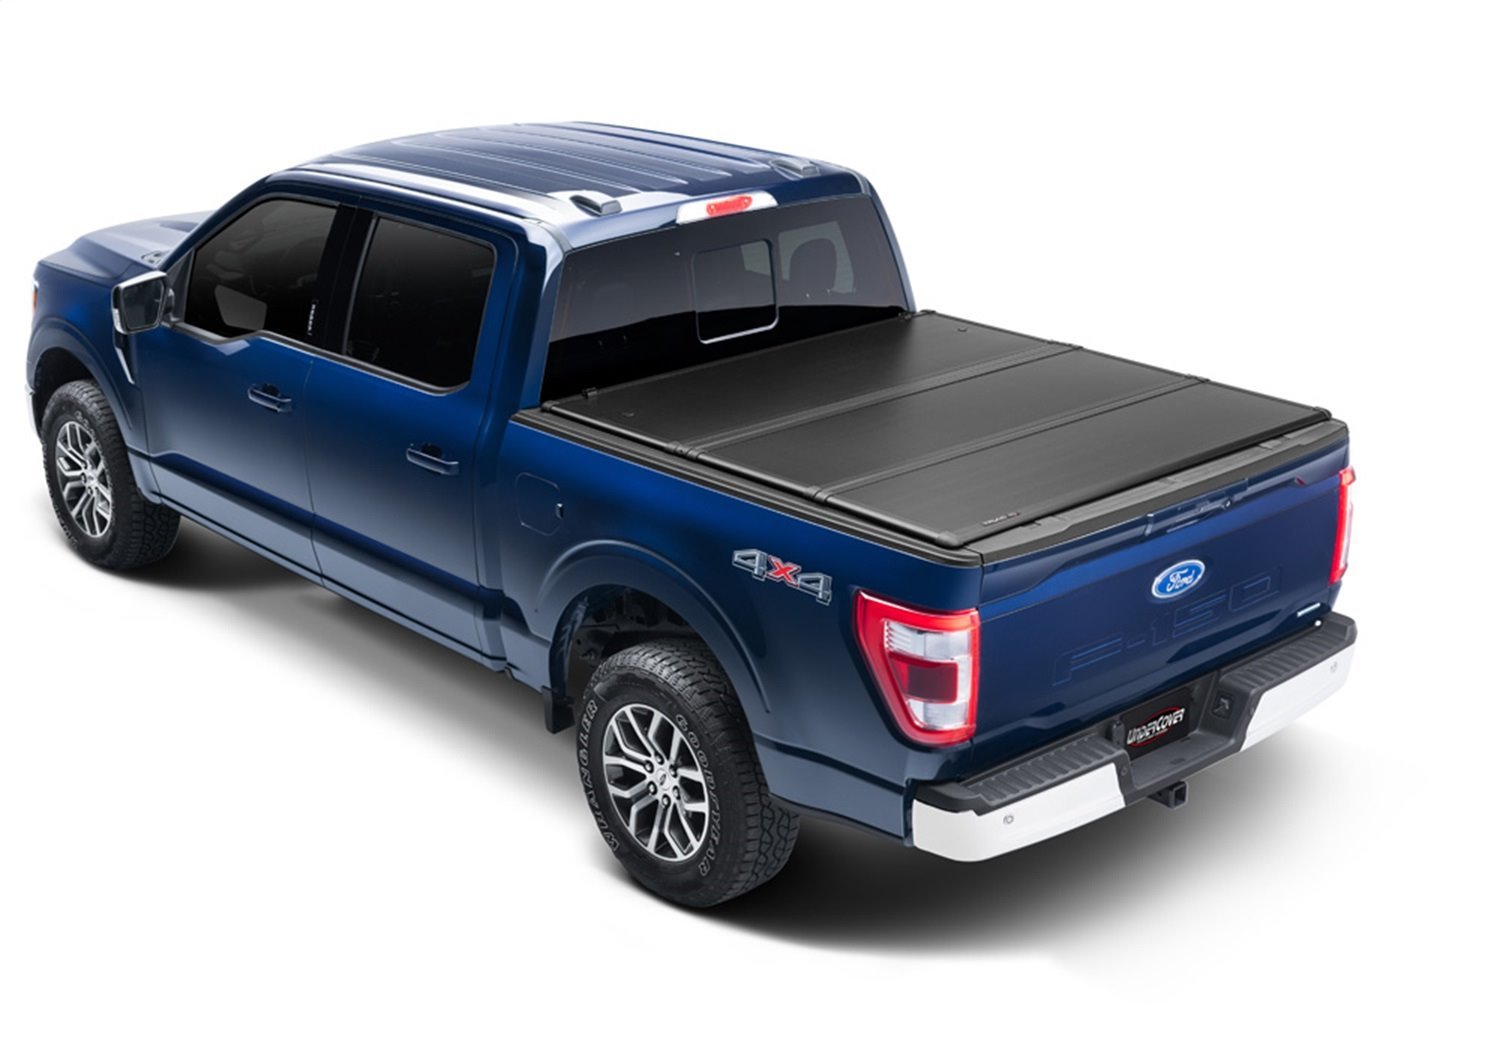 TR26029 Triad Hard Folding Cover, Fits Select Ford F-150 5'7" Bed (Includes Lightning)